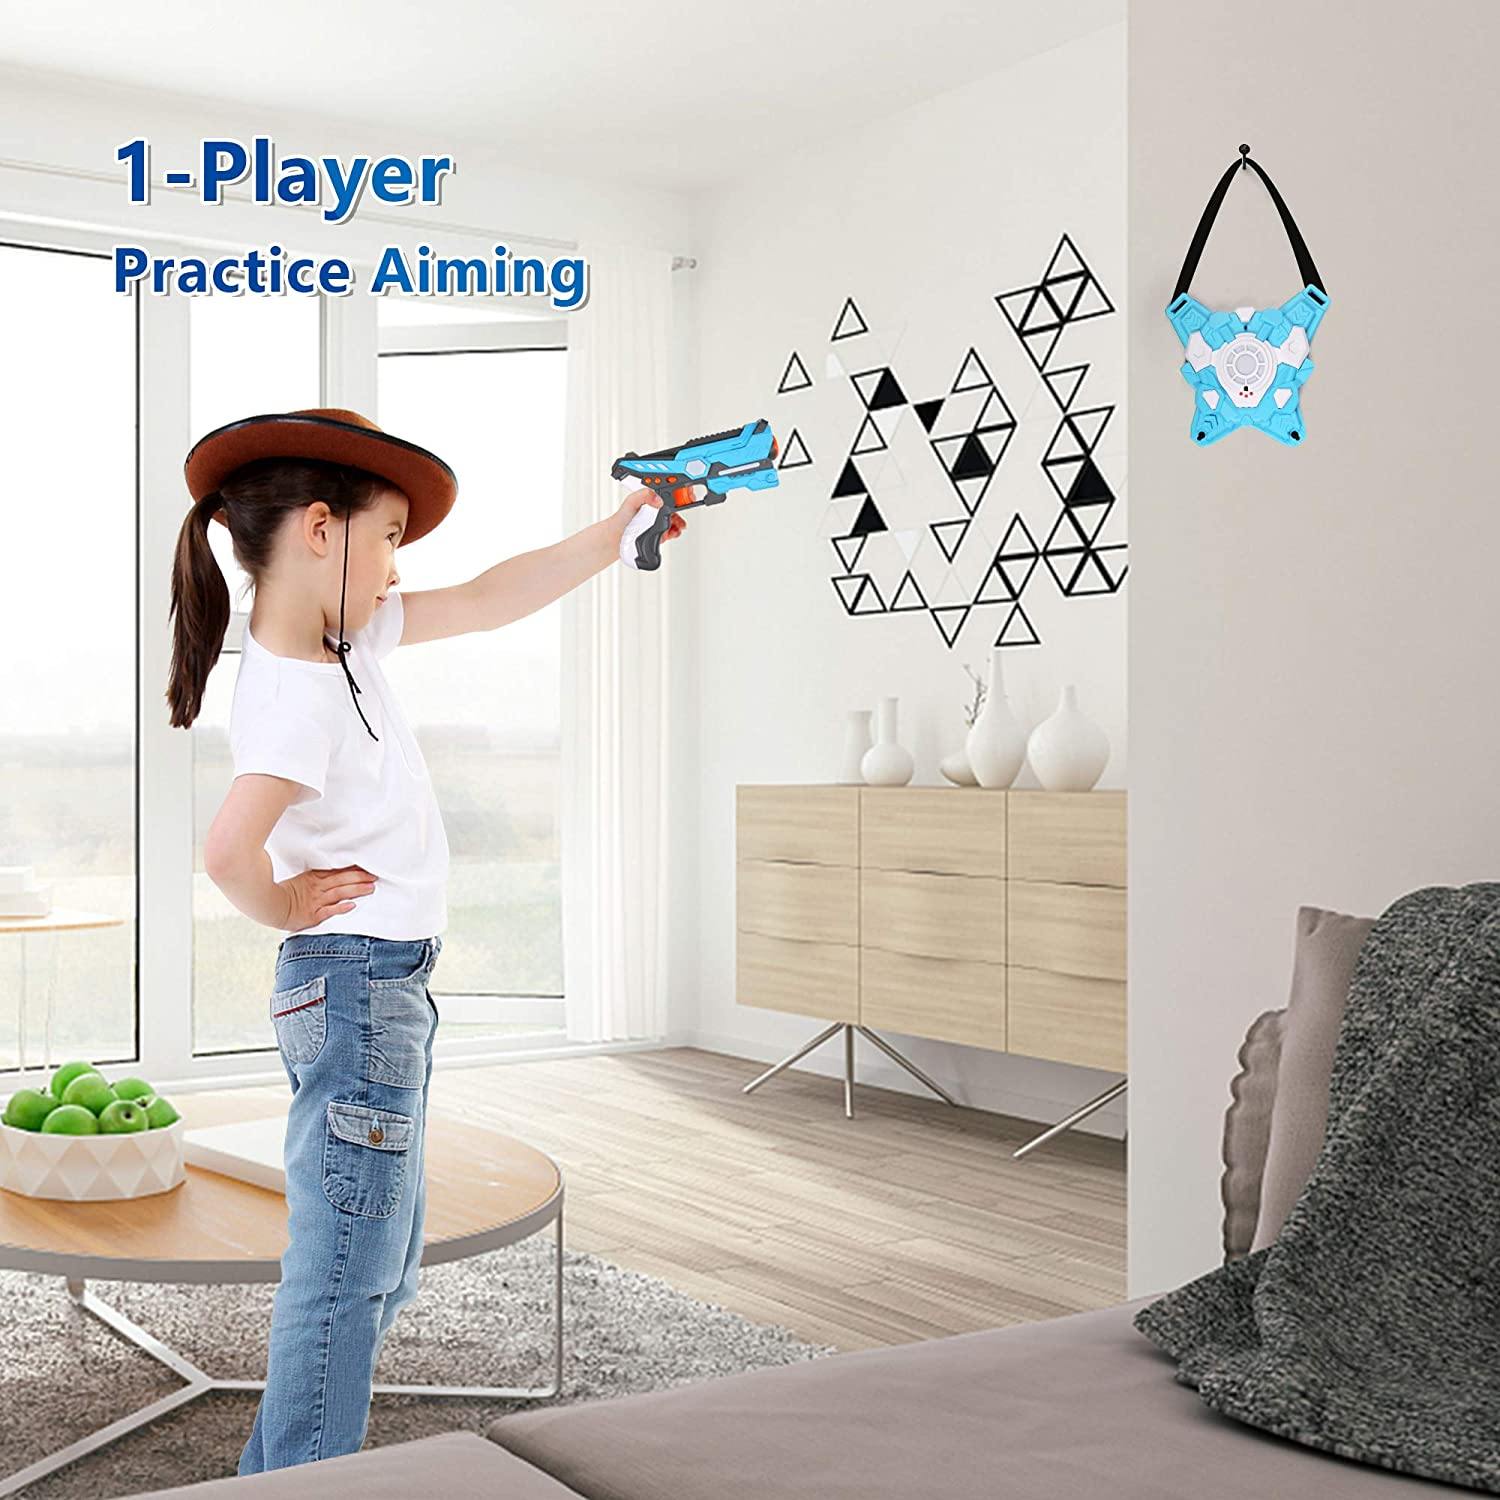 Kids Toys Gun with Vest for Boys Girls Target Shooting Game Toy, Indoor Outdoor Practice Aiming for 1-Player +, Blue - Bosonshop